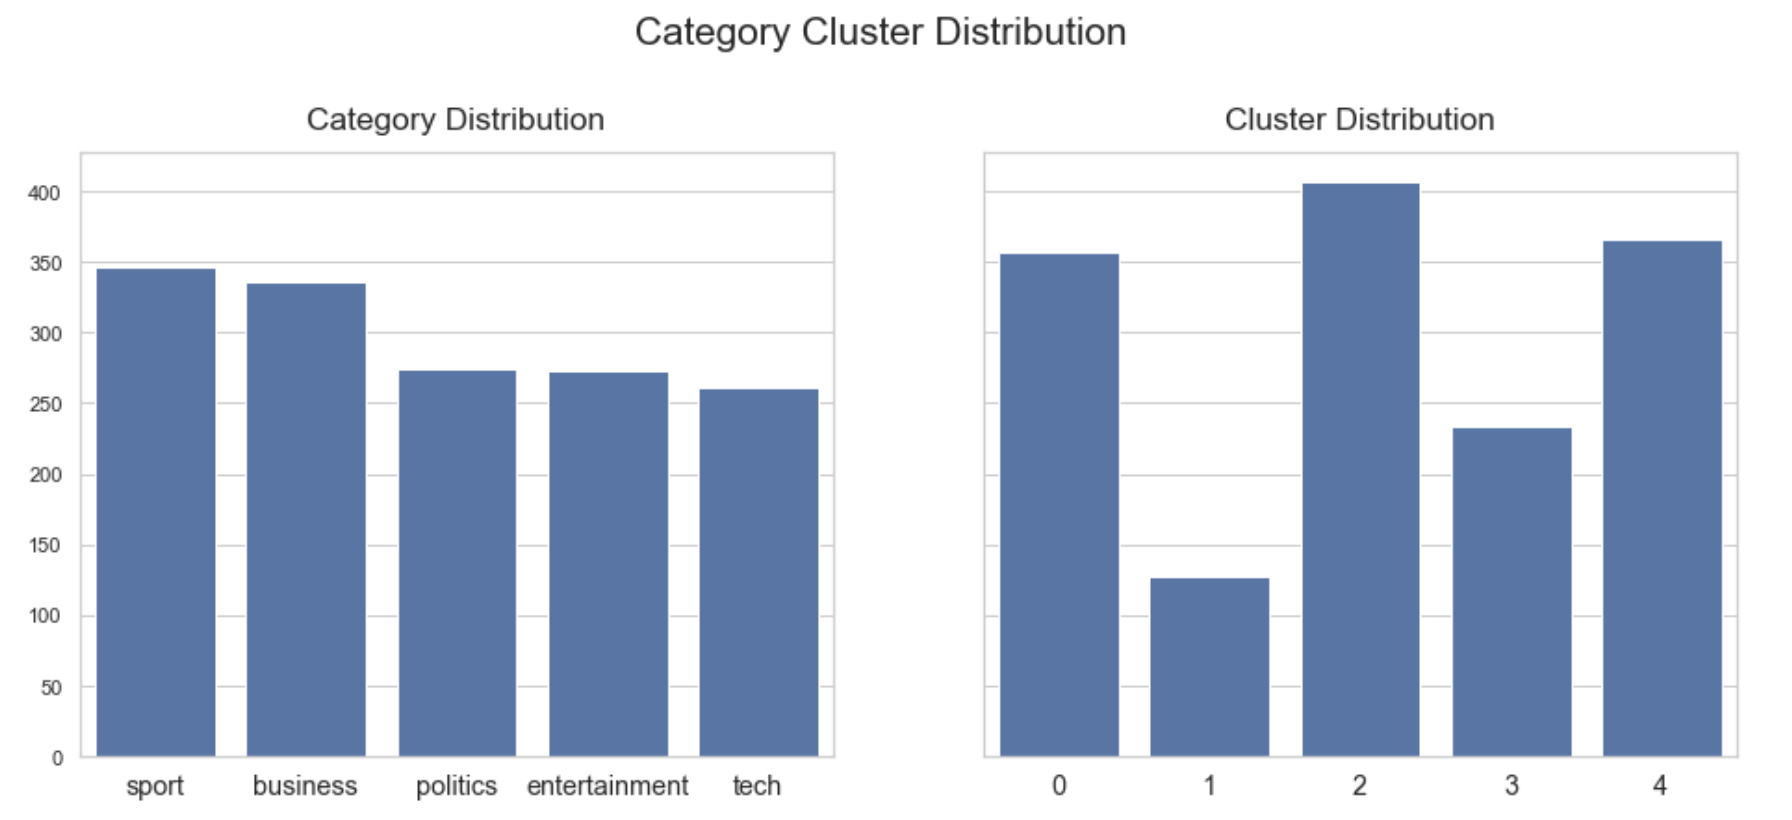 Category Cluster Distribution